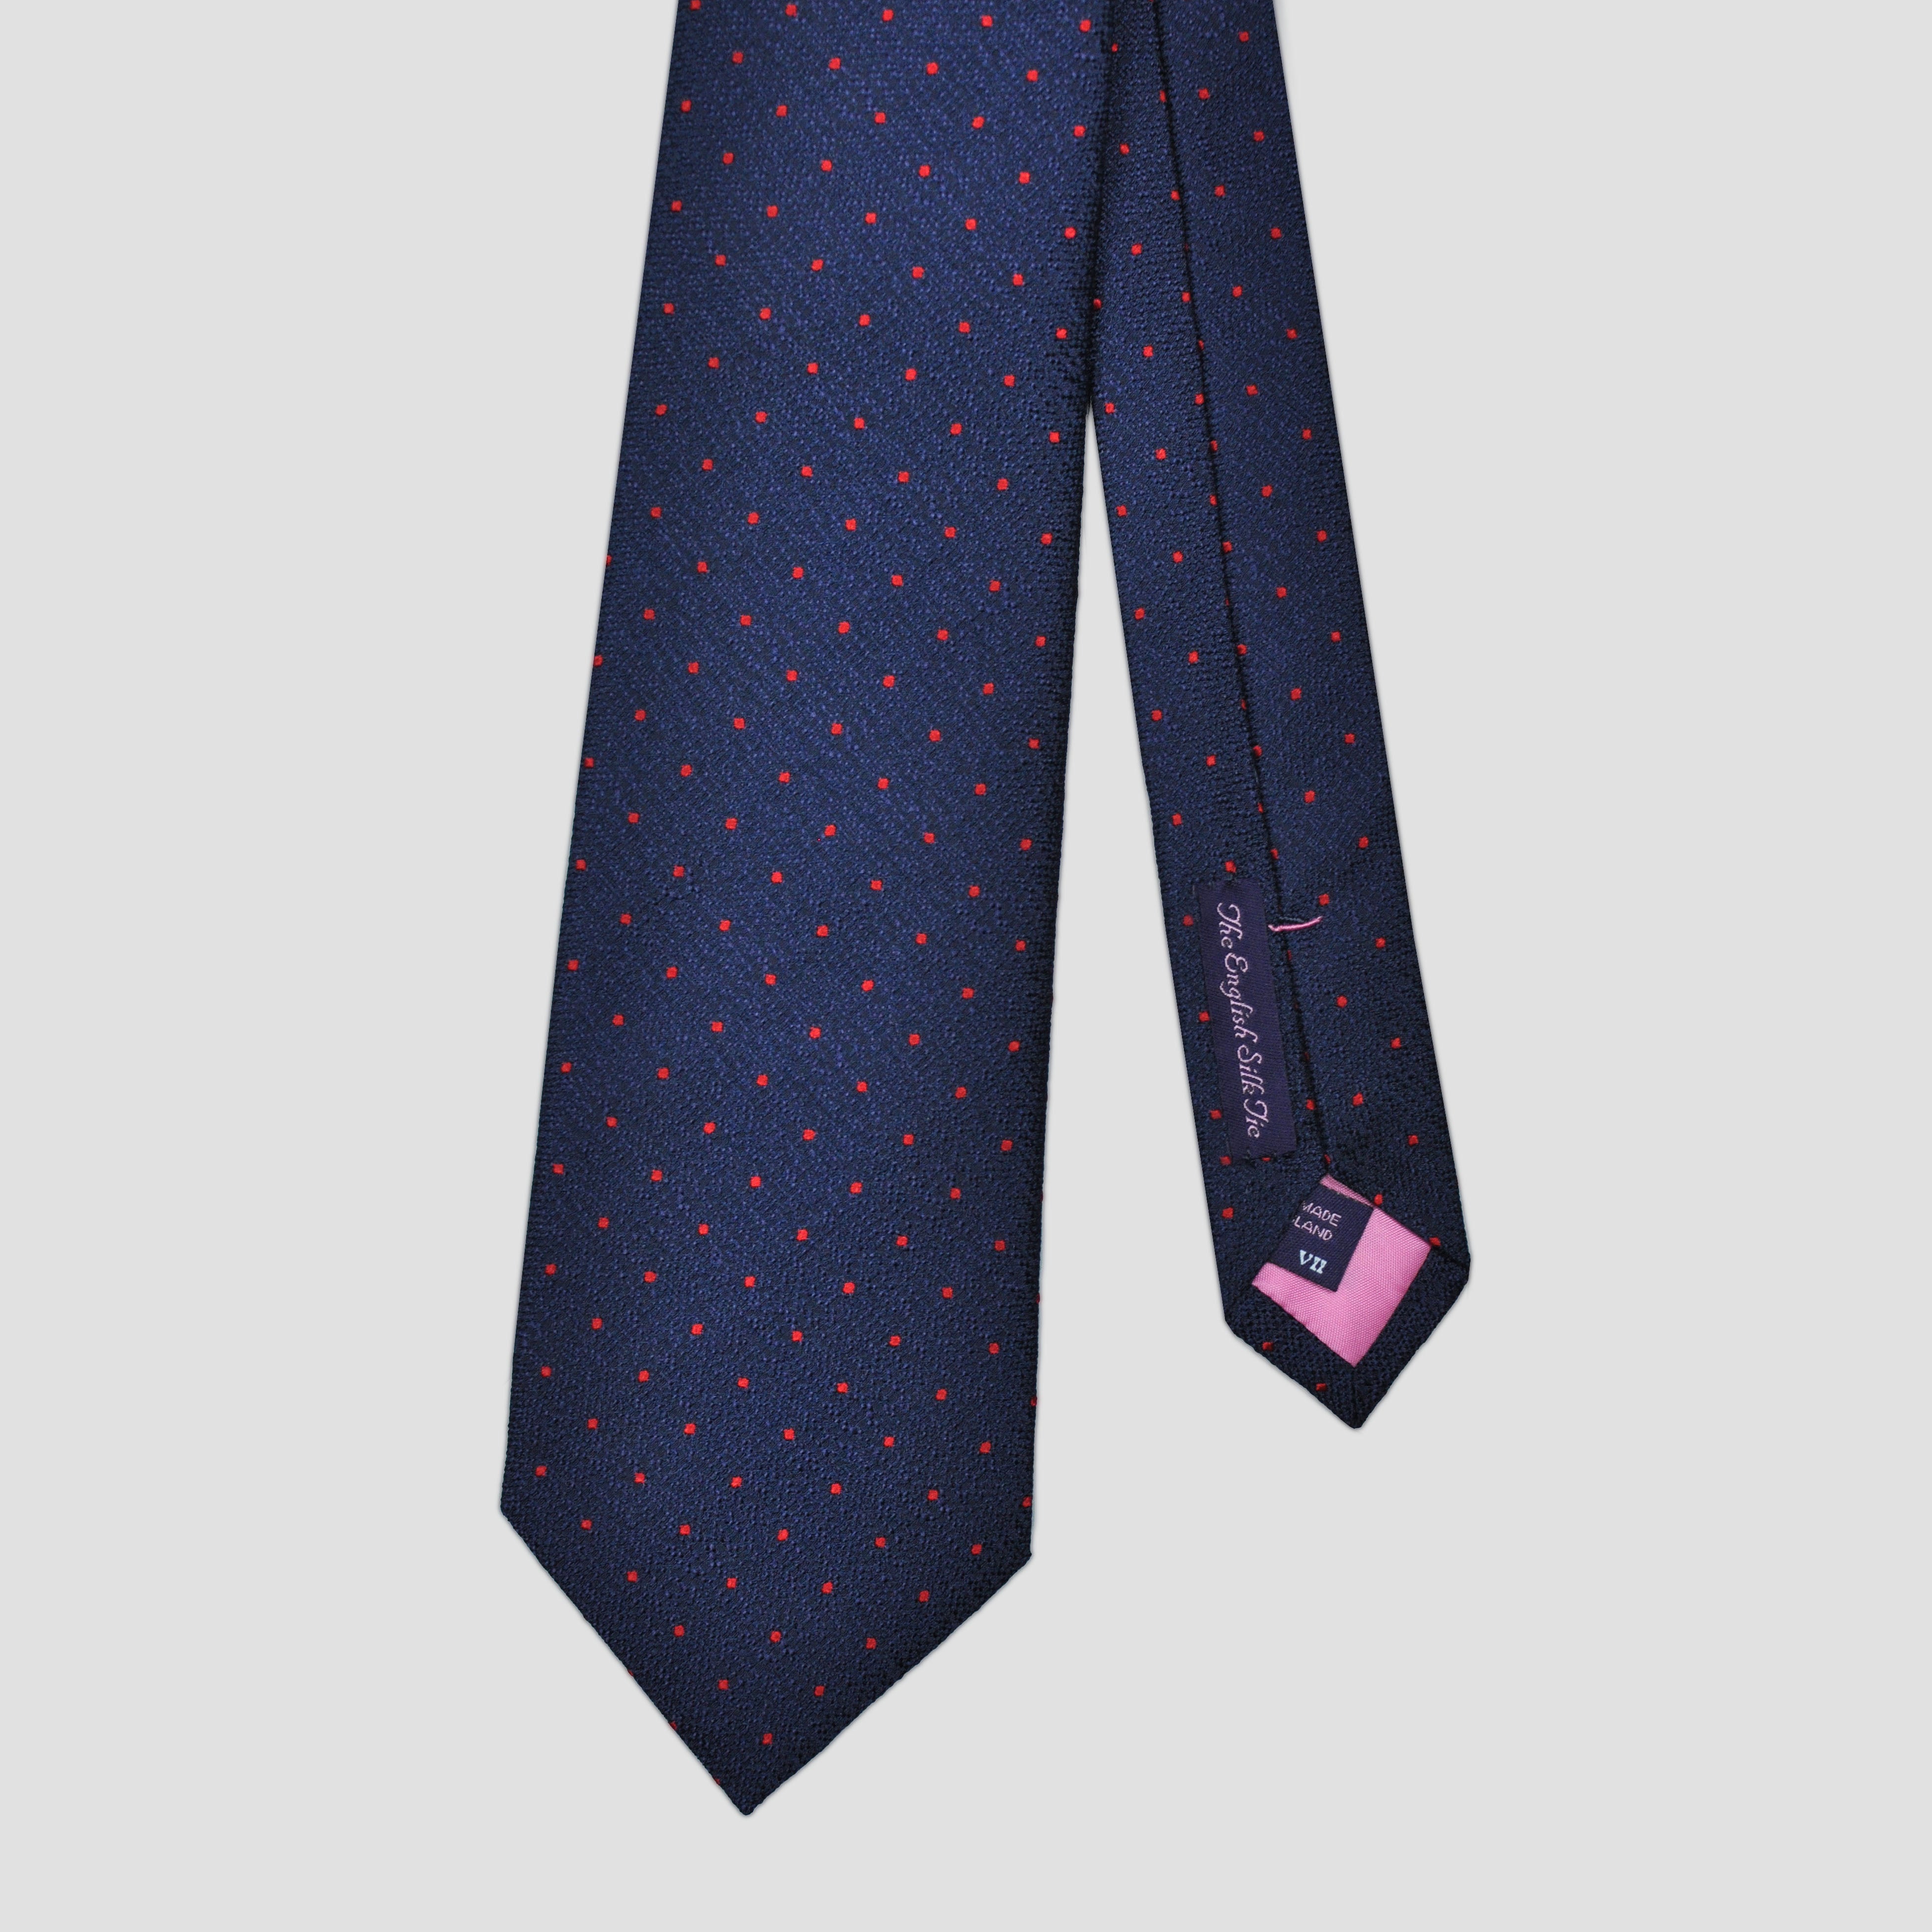 Classic Dots Silk Tie in Navy Blue & Red